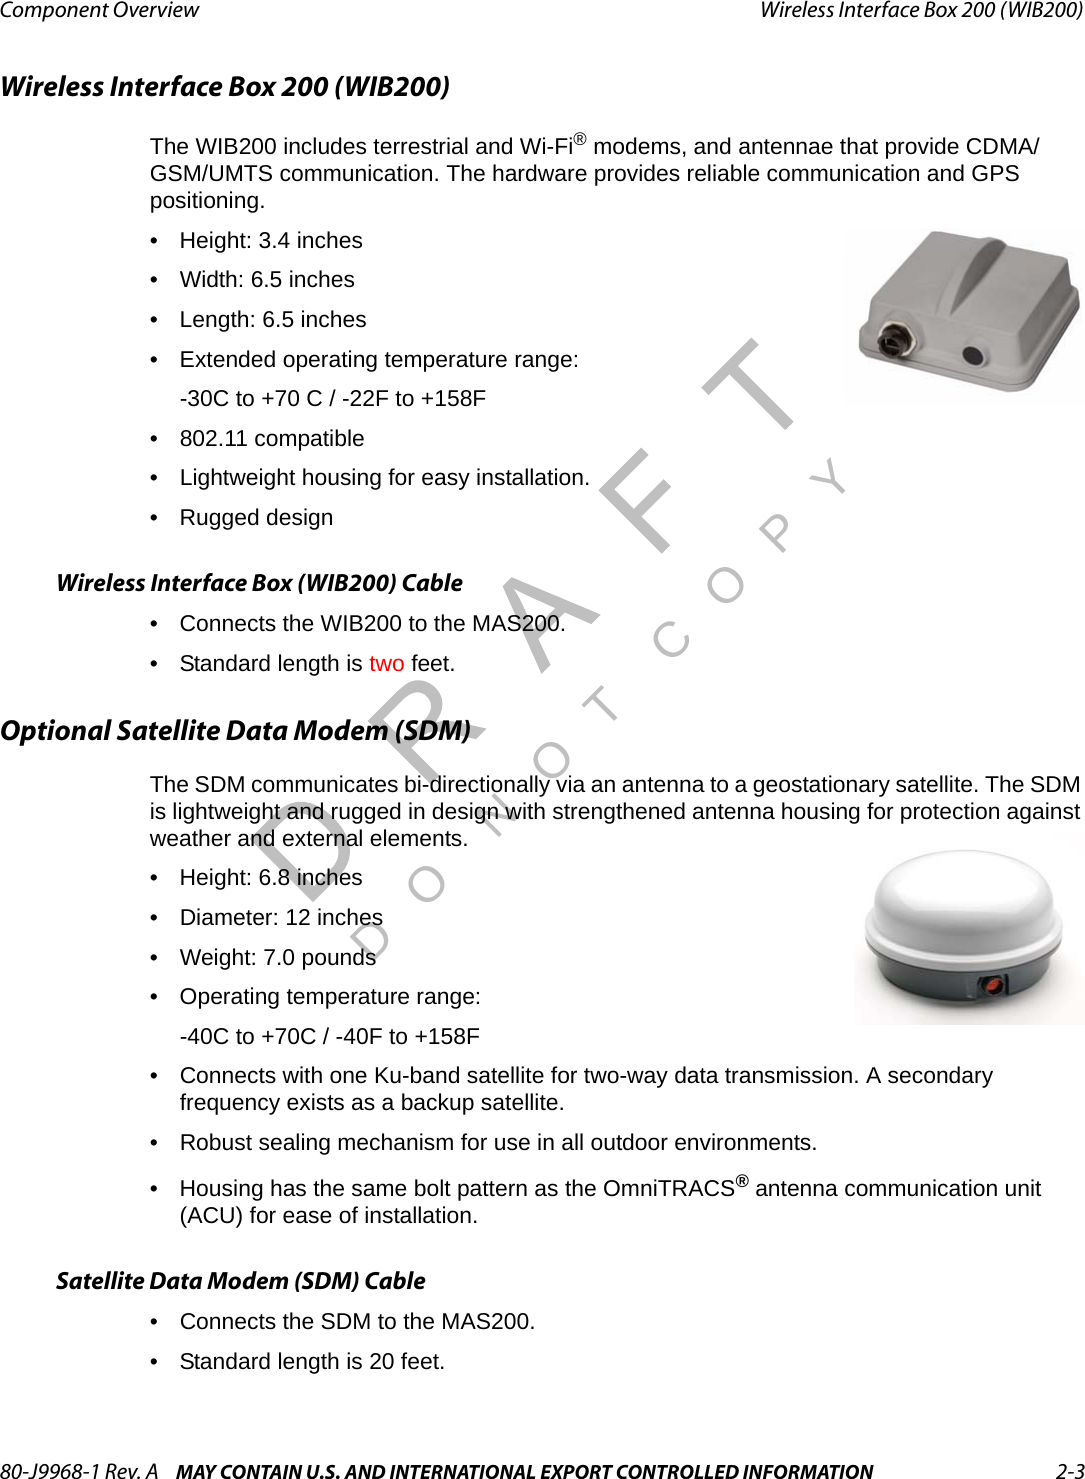 80-J9968-1 Rev. A MAY CONTAIN U.S. AND INTERNATIONAL EXPORT CONTROLLED INFORMATION 2-3Component Overview Wireless Interface Box 200 (WIB200)DO N OT COPYWireless Interface Box 200 (WIB200)The WIB200 includes terrestrial and Wi-Fi® modems, and antennae that provide CDMA/GSM/UMTS communication. The hardware provides reliable communication and GPS positioning.• Height: 3.4 inches• Width: 6.5 inches• Length: 6.5 inches• Extended operating temperature range:-30C to +70 C / -22F to +158F• 802.11 compatible• Lightweight housing for easy installation.• Rugged designWireless Interface Box (WIB200) Cable• Connects the WIB200 to the MAS200.• Standard length is two feet.Optional Satellite Data Modem (SDM)The SDM communicates bi-directionally via an antenna to a geostationary satellite. The SDM is lightweight and rugged in design with strengthened antenna housing for protection against weather and external elements.• Height: 6.8 inches • Diameter: 12 inches• Weight: 7.0 pounds• Operating temperature range:-40C to +70C / -40F to +158F• Connects with one Ku-band satellite for two-way data transmission. A secondary frequency exists as a backup satellite.• Robust sealing mechanism for use in all outdoor environments.• Housing has the same bolt pattern as the OmniTRACS® antenna communication unit (ACU) for ease of installation.Satellite Data Modem (SDM) Cable• Connects the SDM to the MAS200.• Standard length is 20 feet.